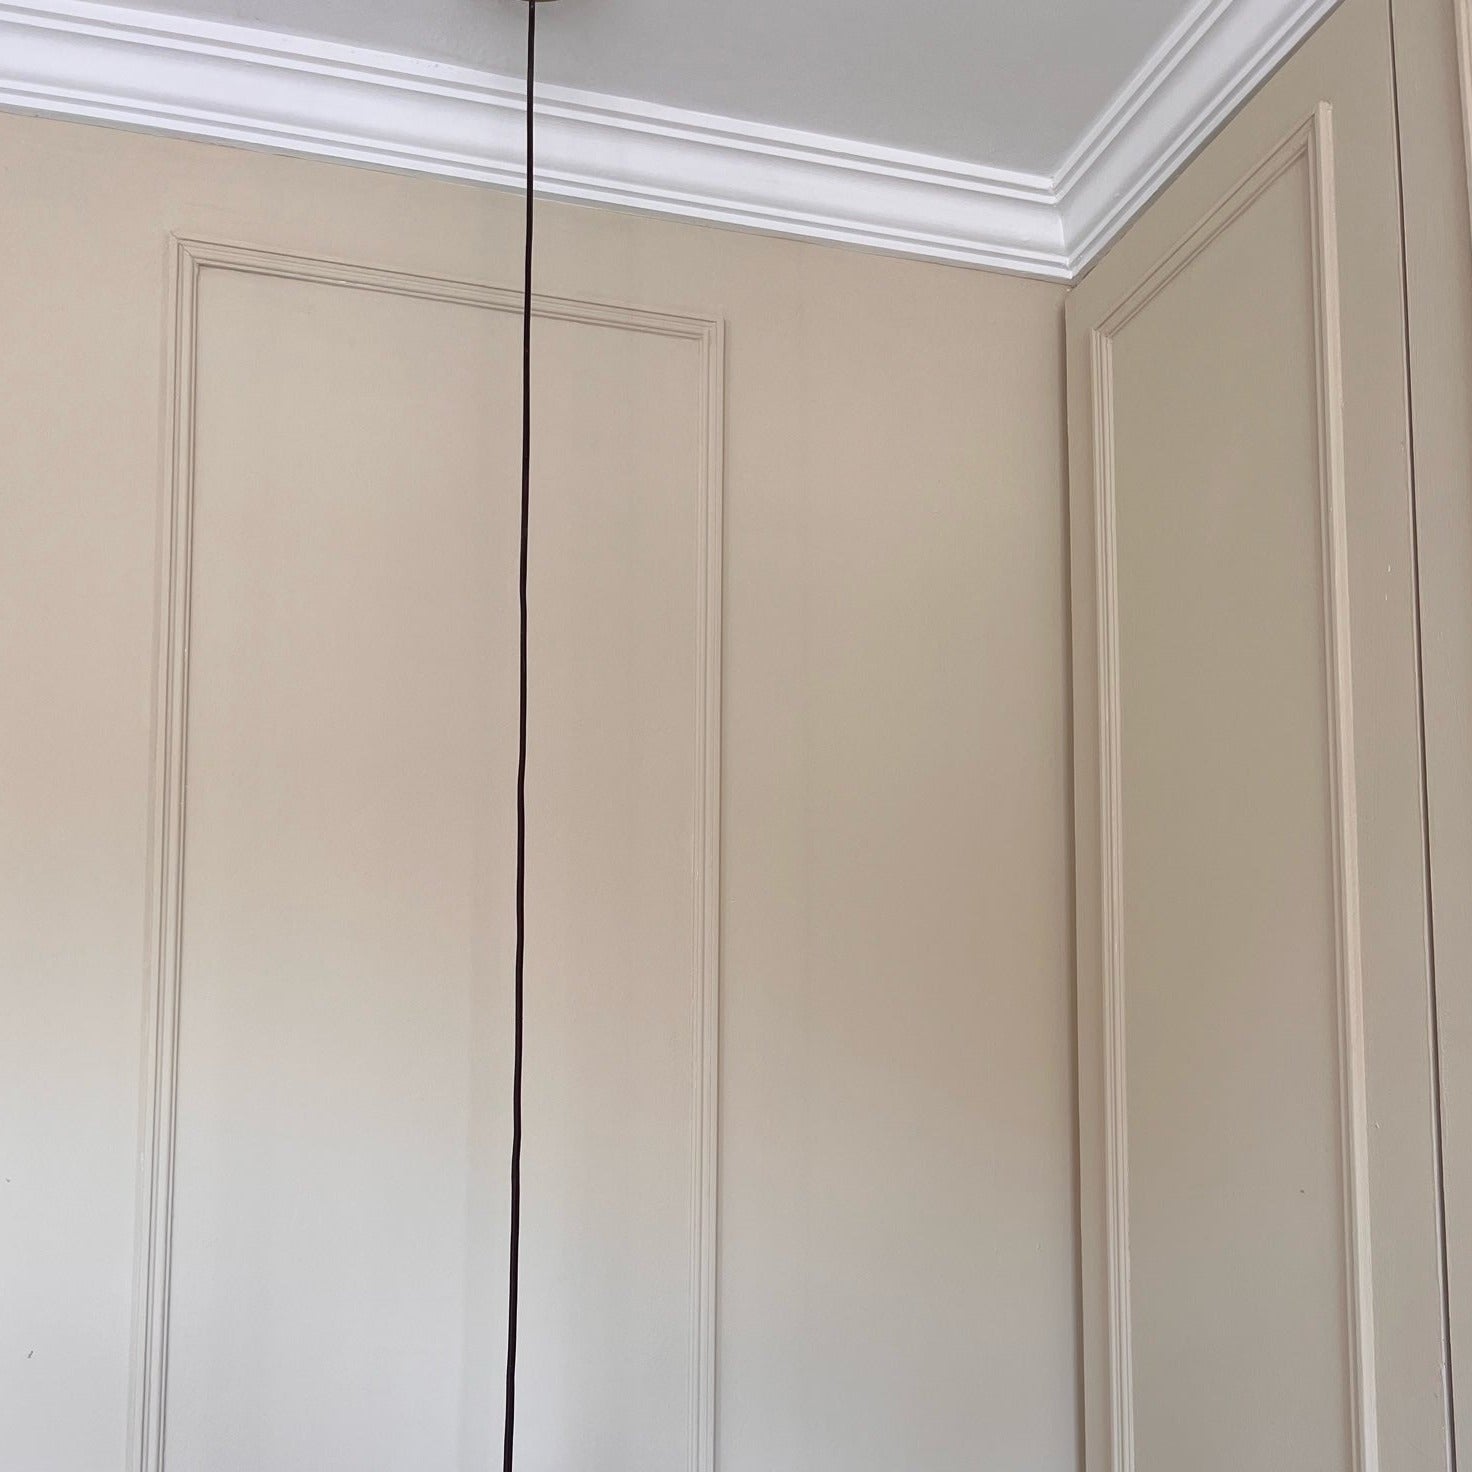 panelled walls with victorian style plaster coving 